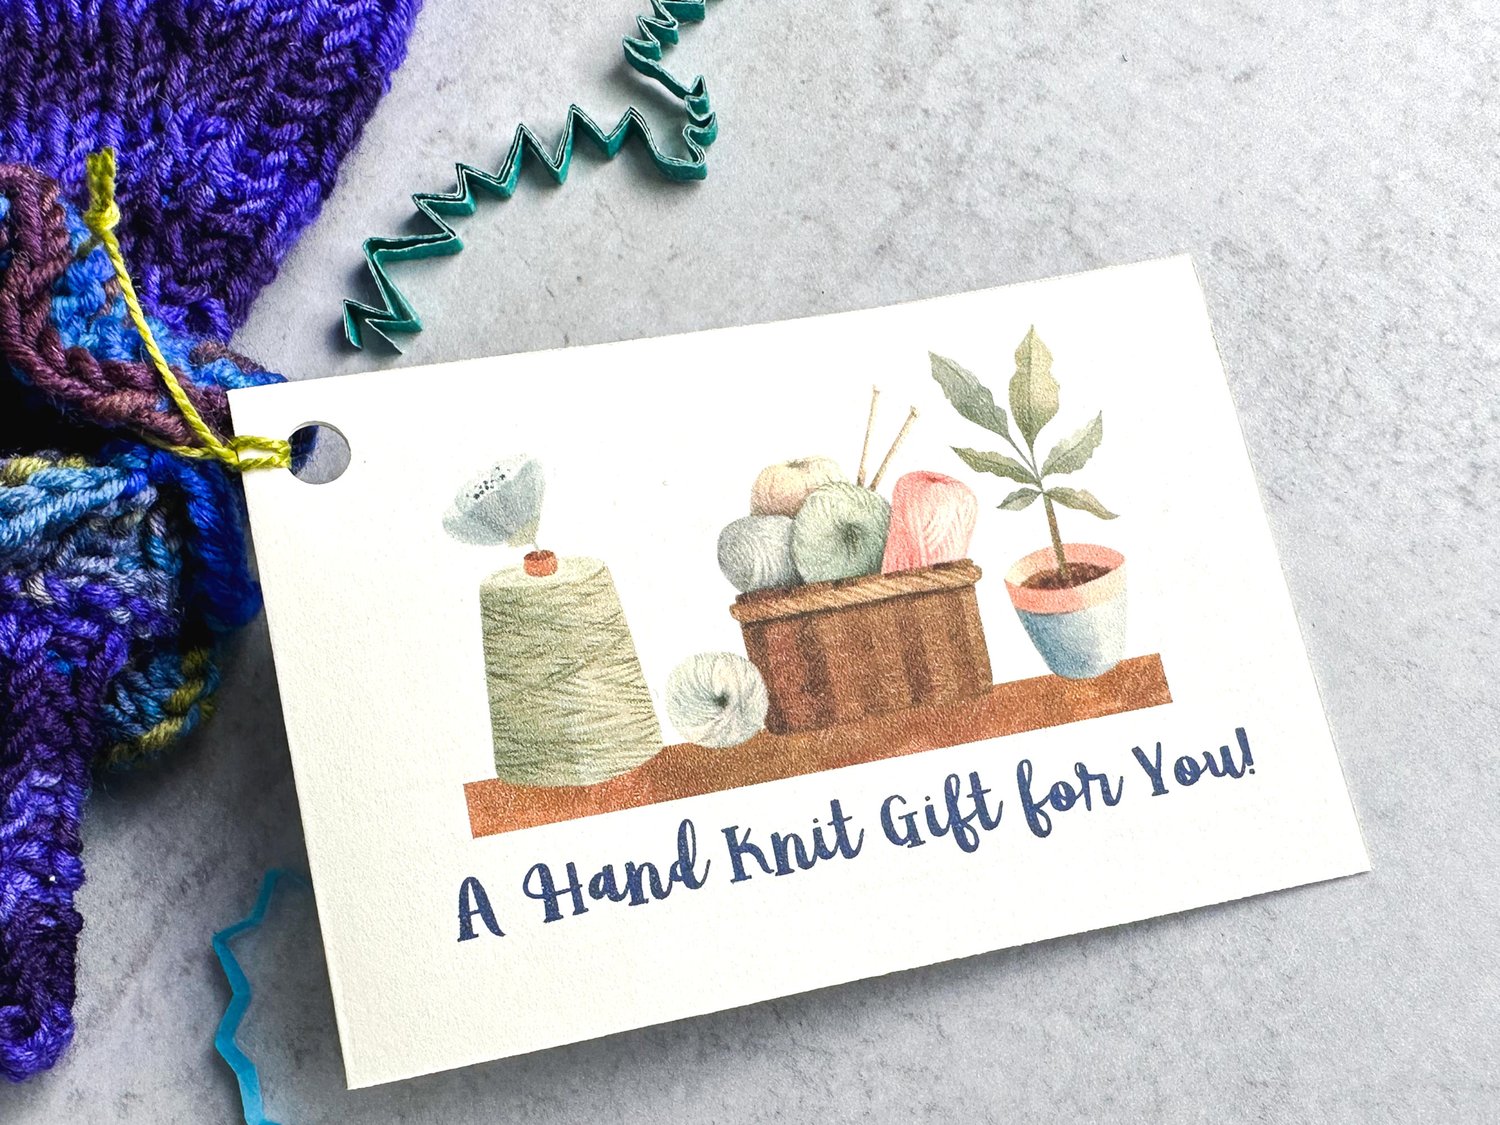 Card with watercolor painting of knitting yarns and a plant on a shelf attached to dark purple knitted item on a light grey background